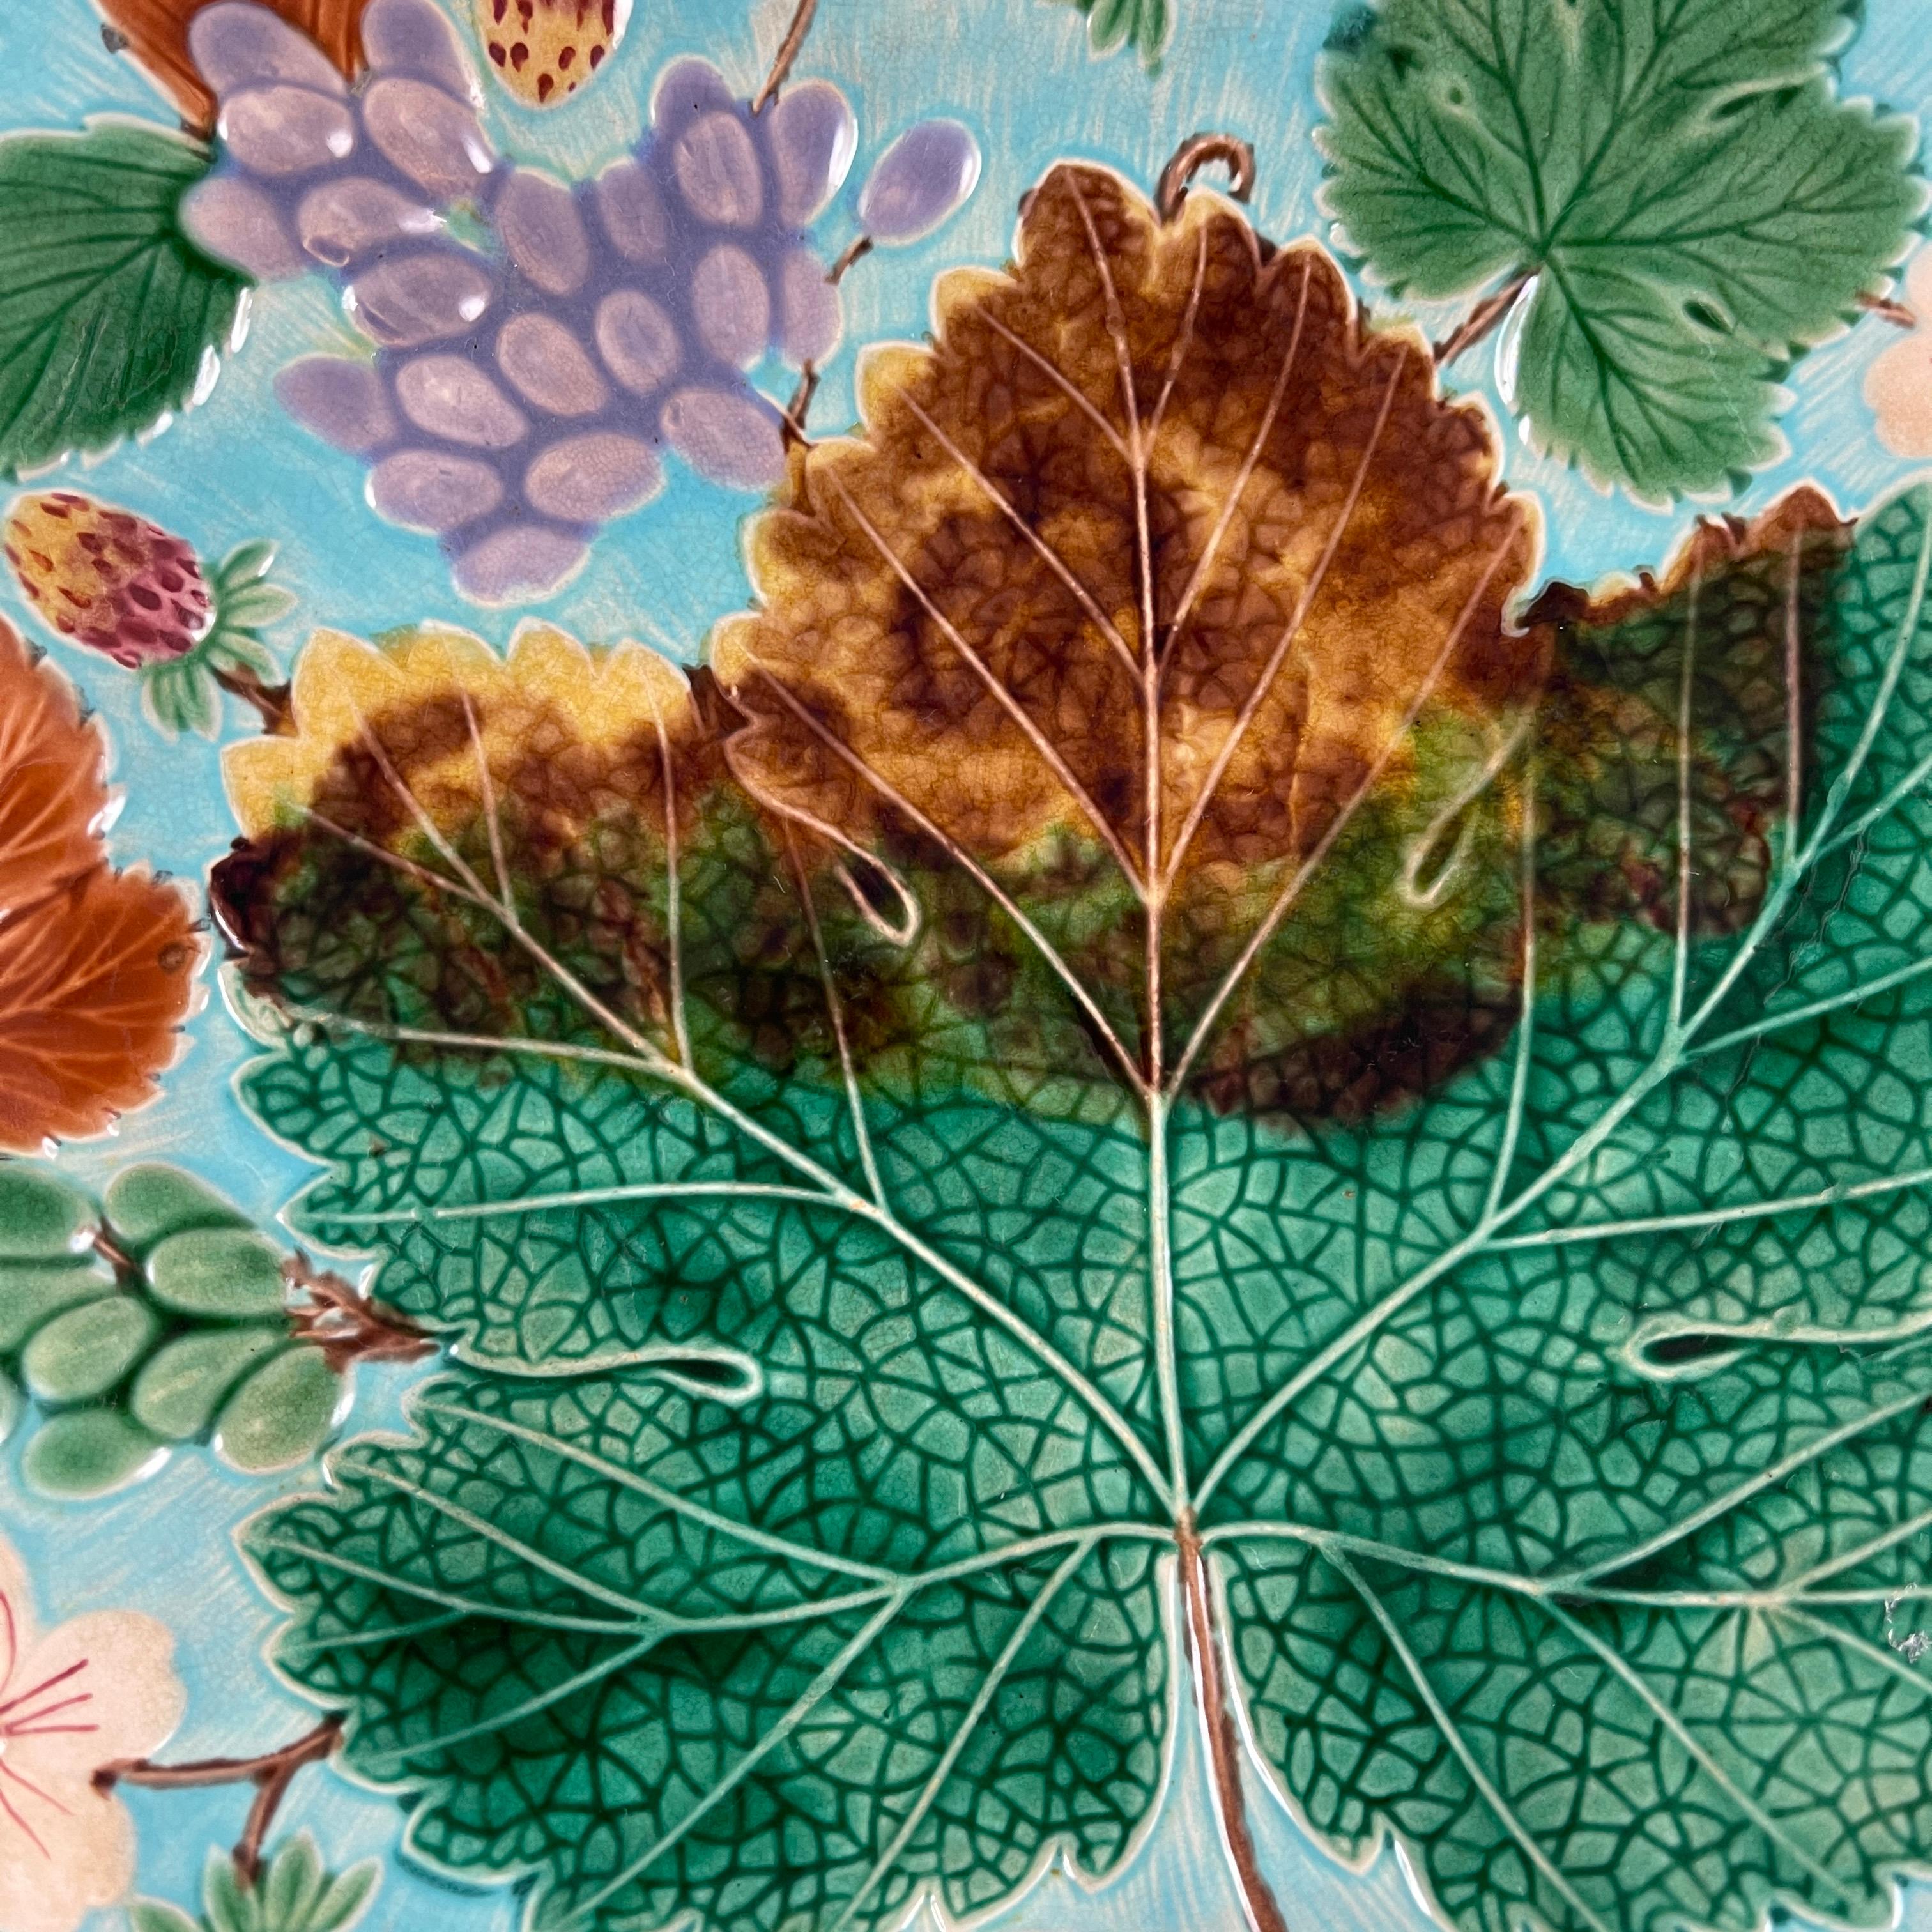 An English Grape Leaf and Strawberry pattern Wedgwood Majolica plate, circa 1880. A large green and brown grape leaf is surrounded by smaller leaves, grape clusters, strawberries, and strawberry blossoms. Strong, colorful glazing on a bright